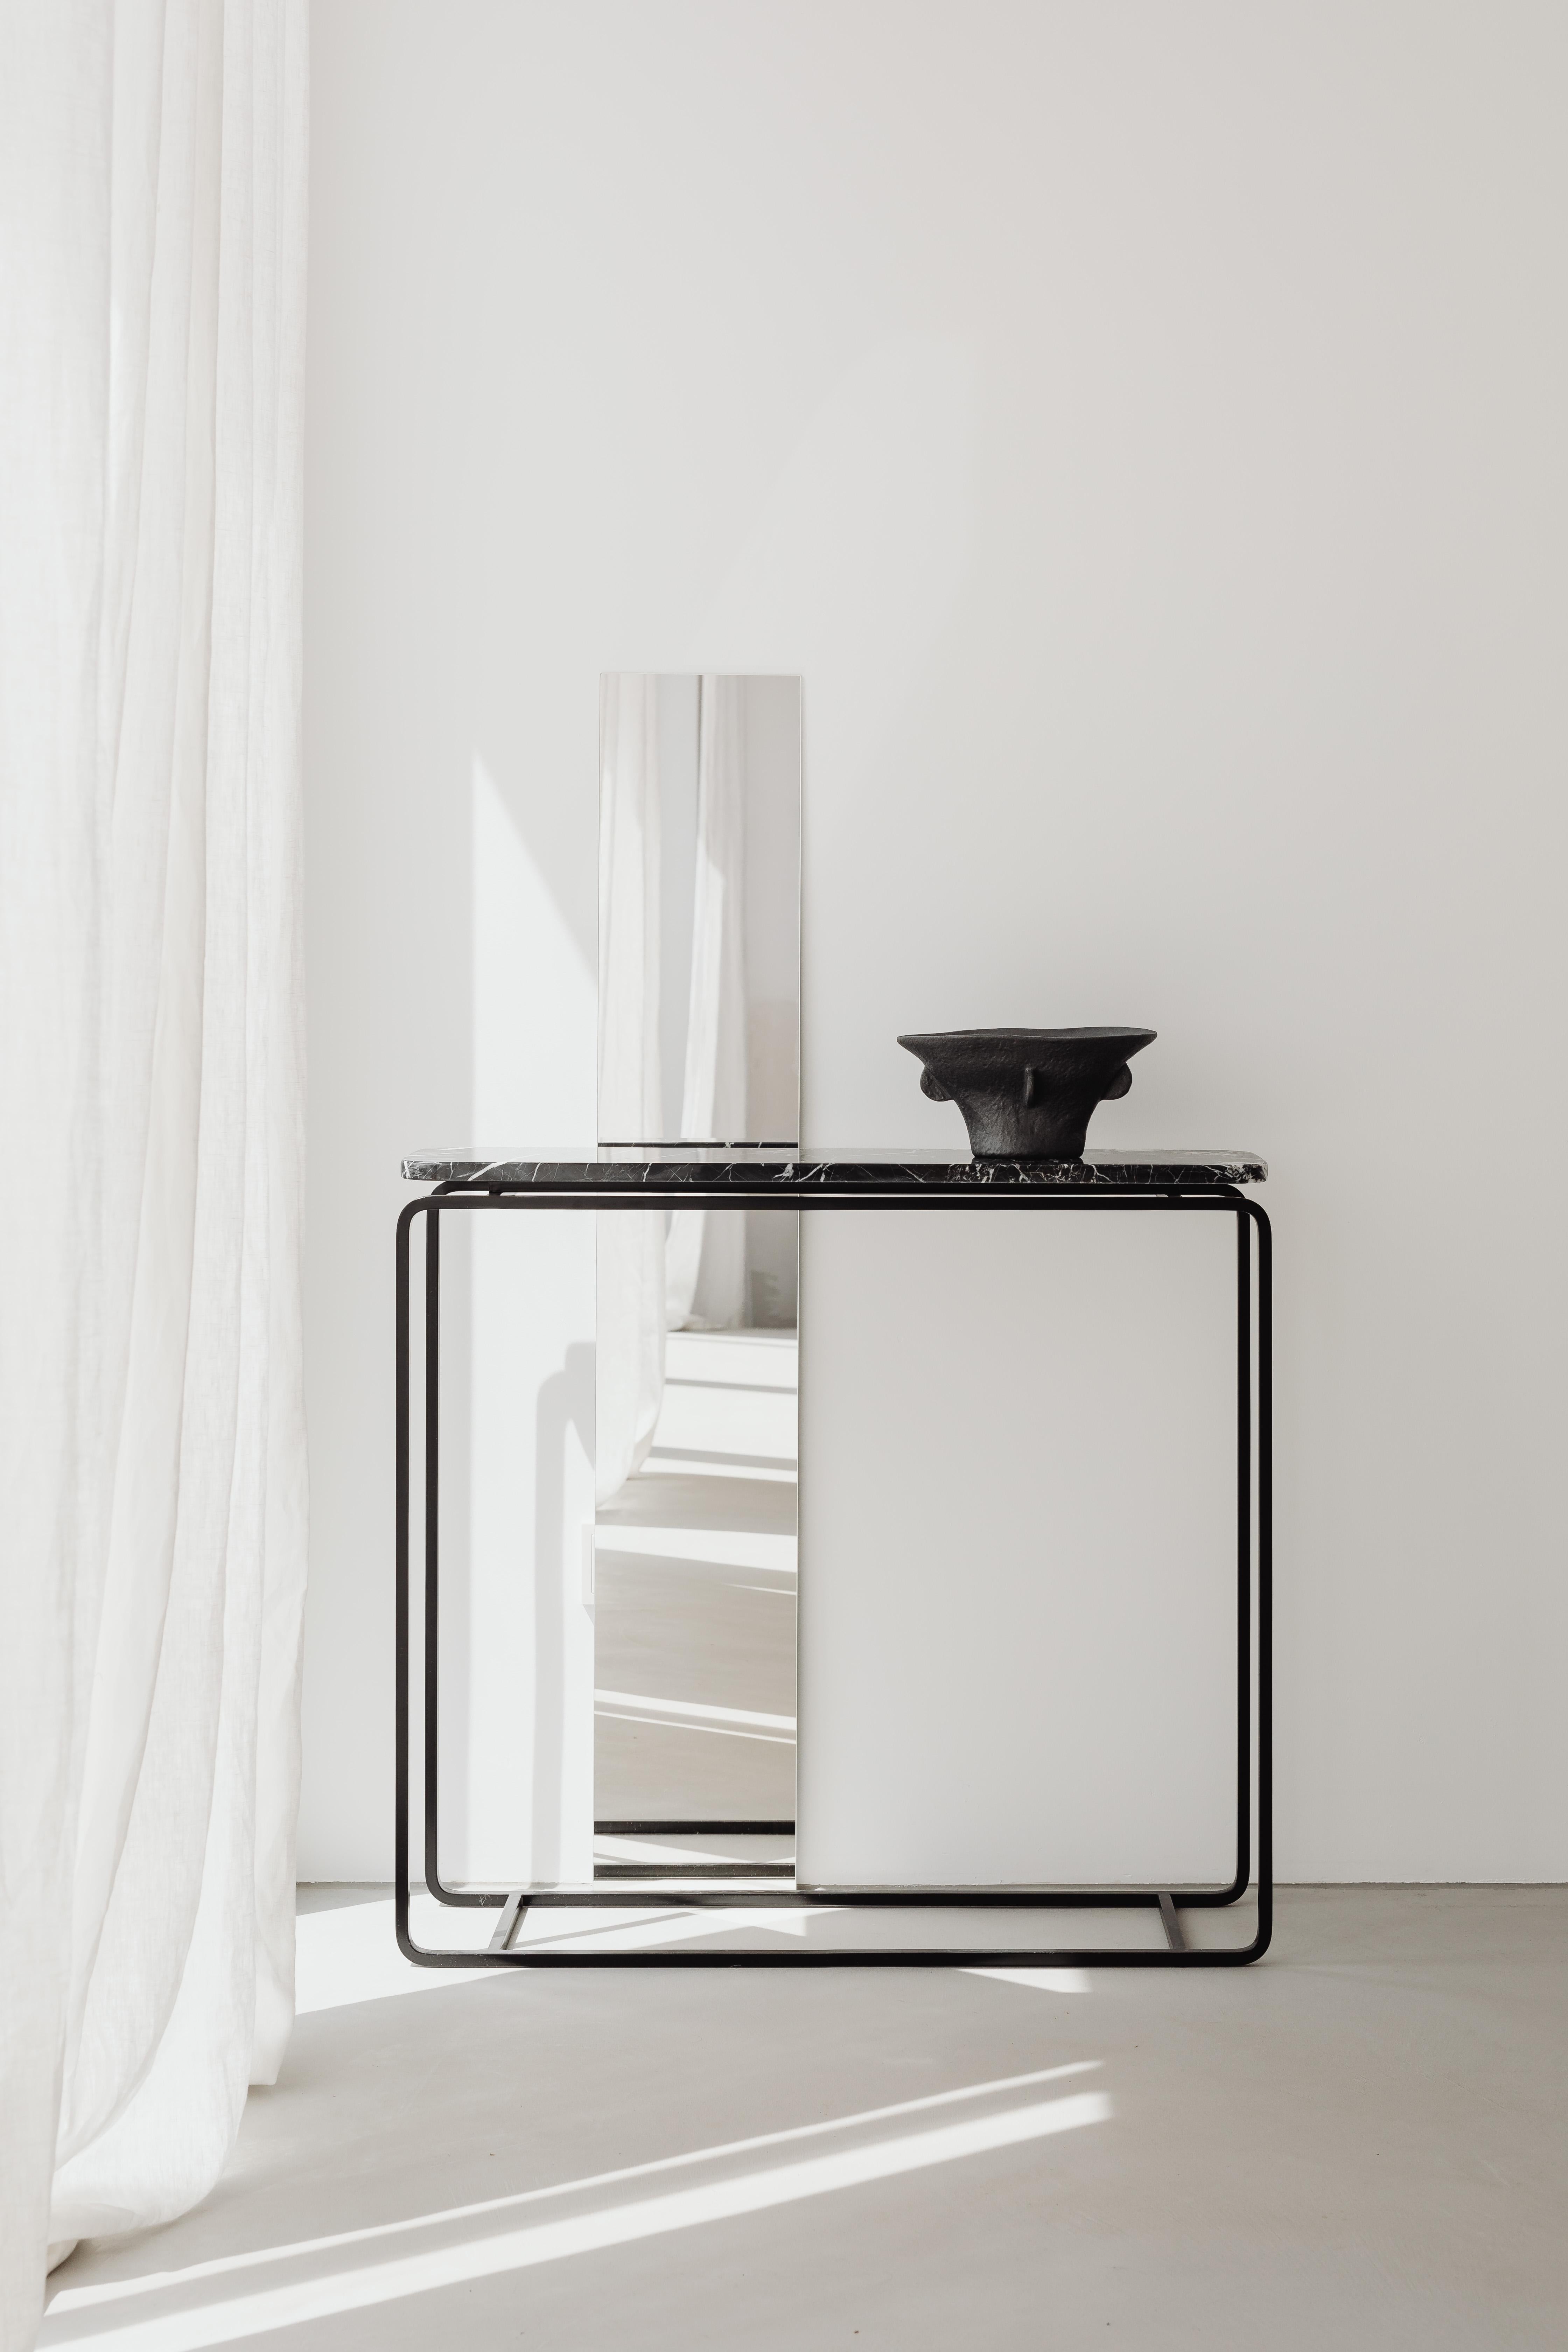 FORM-C is the only console in the FORM collection. The top is slightly raised, and the rounded corners perfectly correspond to the rounded shape of the frame. All of these details combined are the reason this unique console has such a delicate and